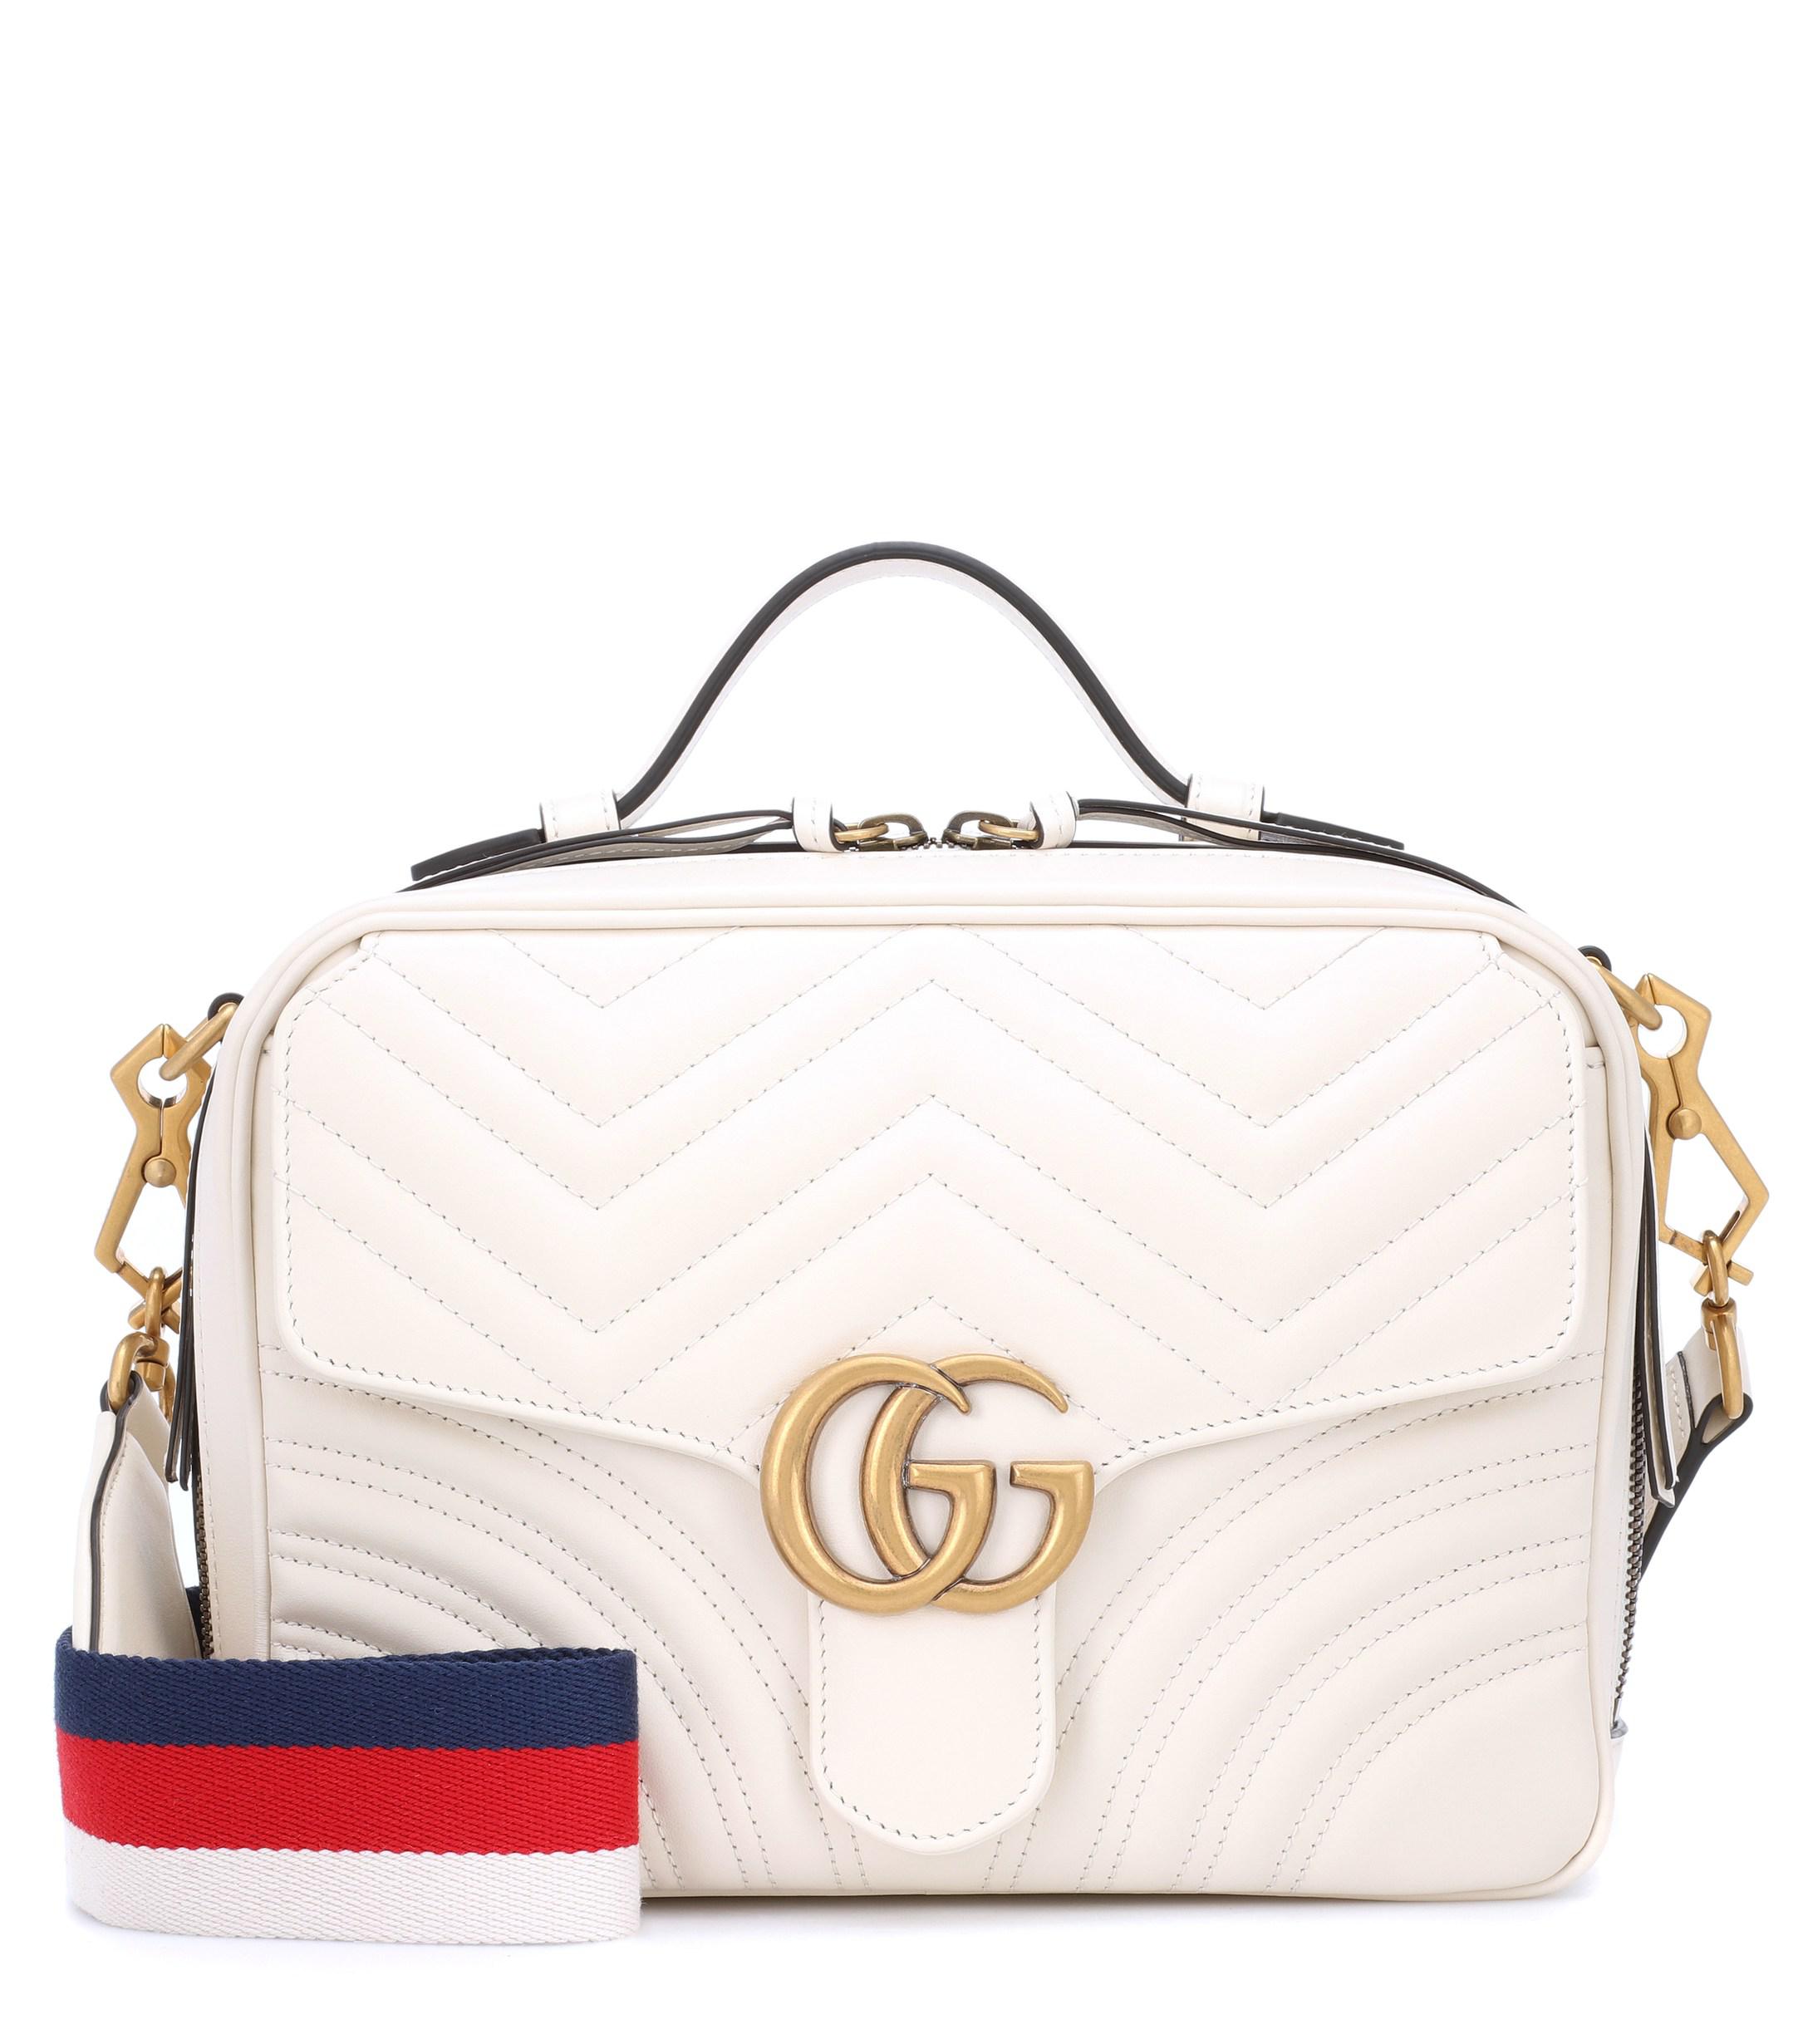 Gucci Leather GG Marmont Small Shoulder Bag in m.wh,m.wh,m.w.h.r.m (White) - Save 6% - Lyst